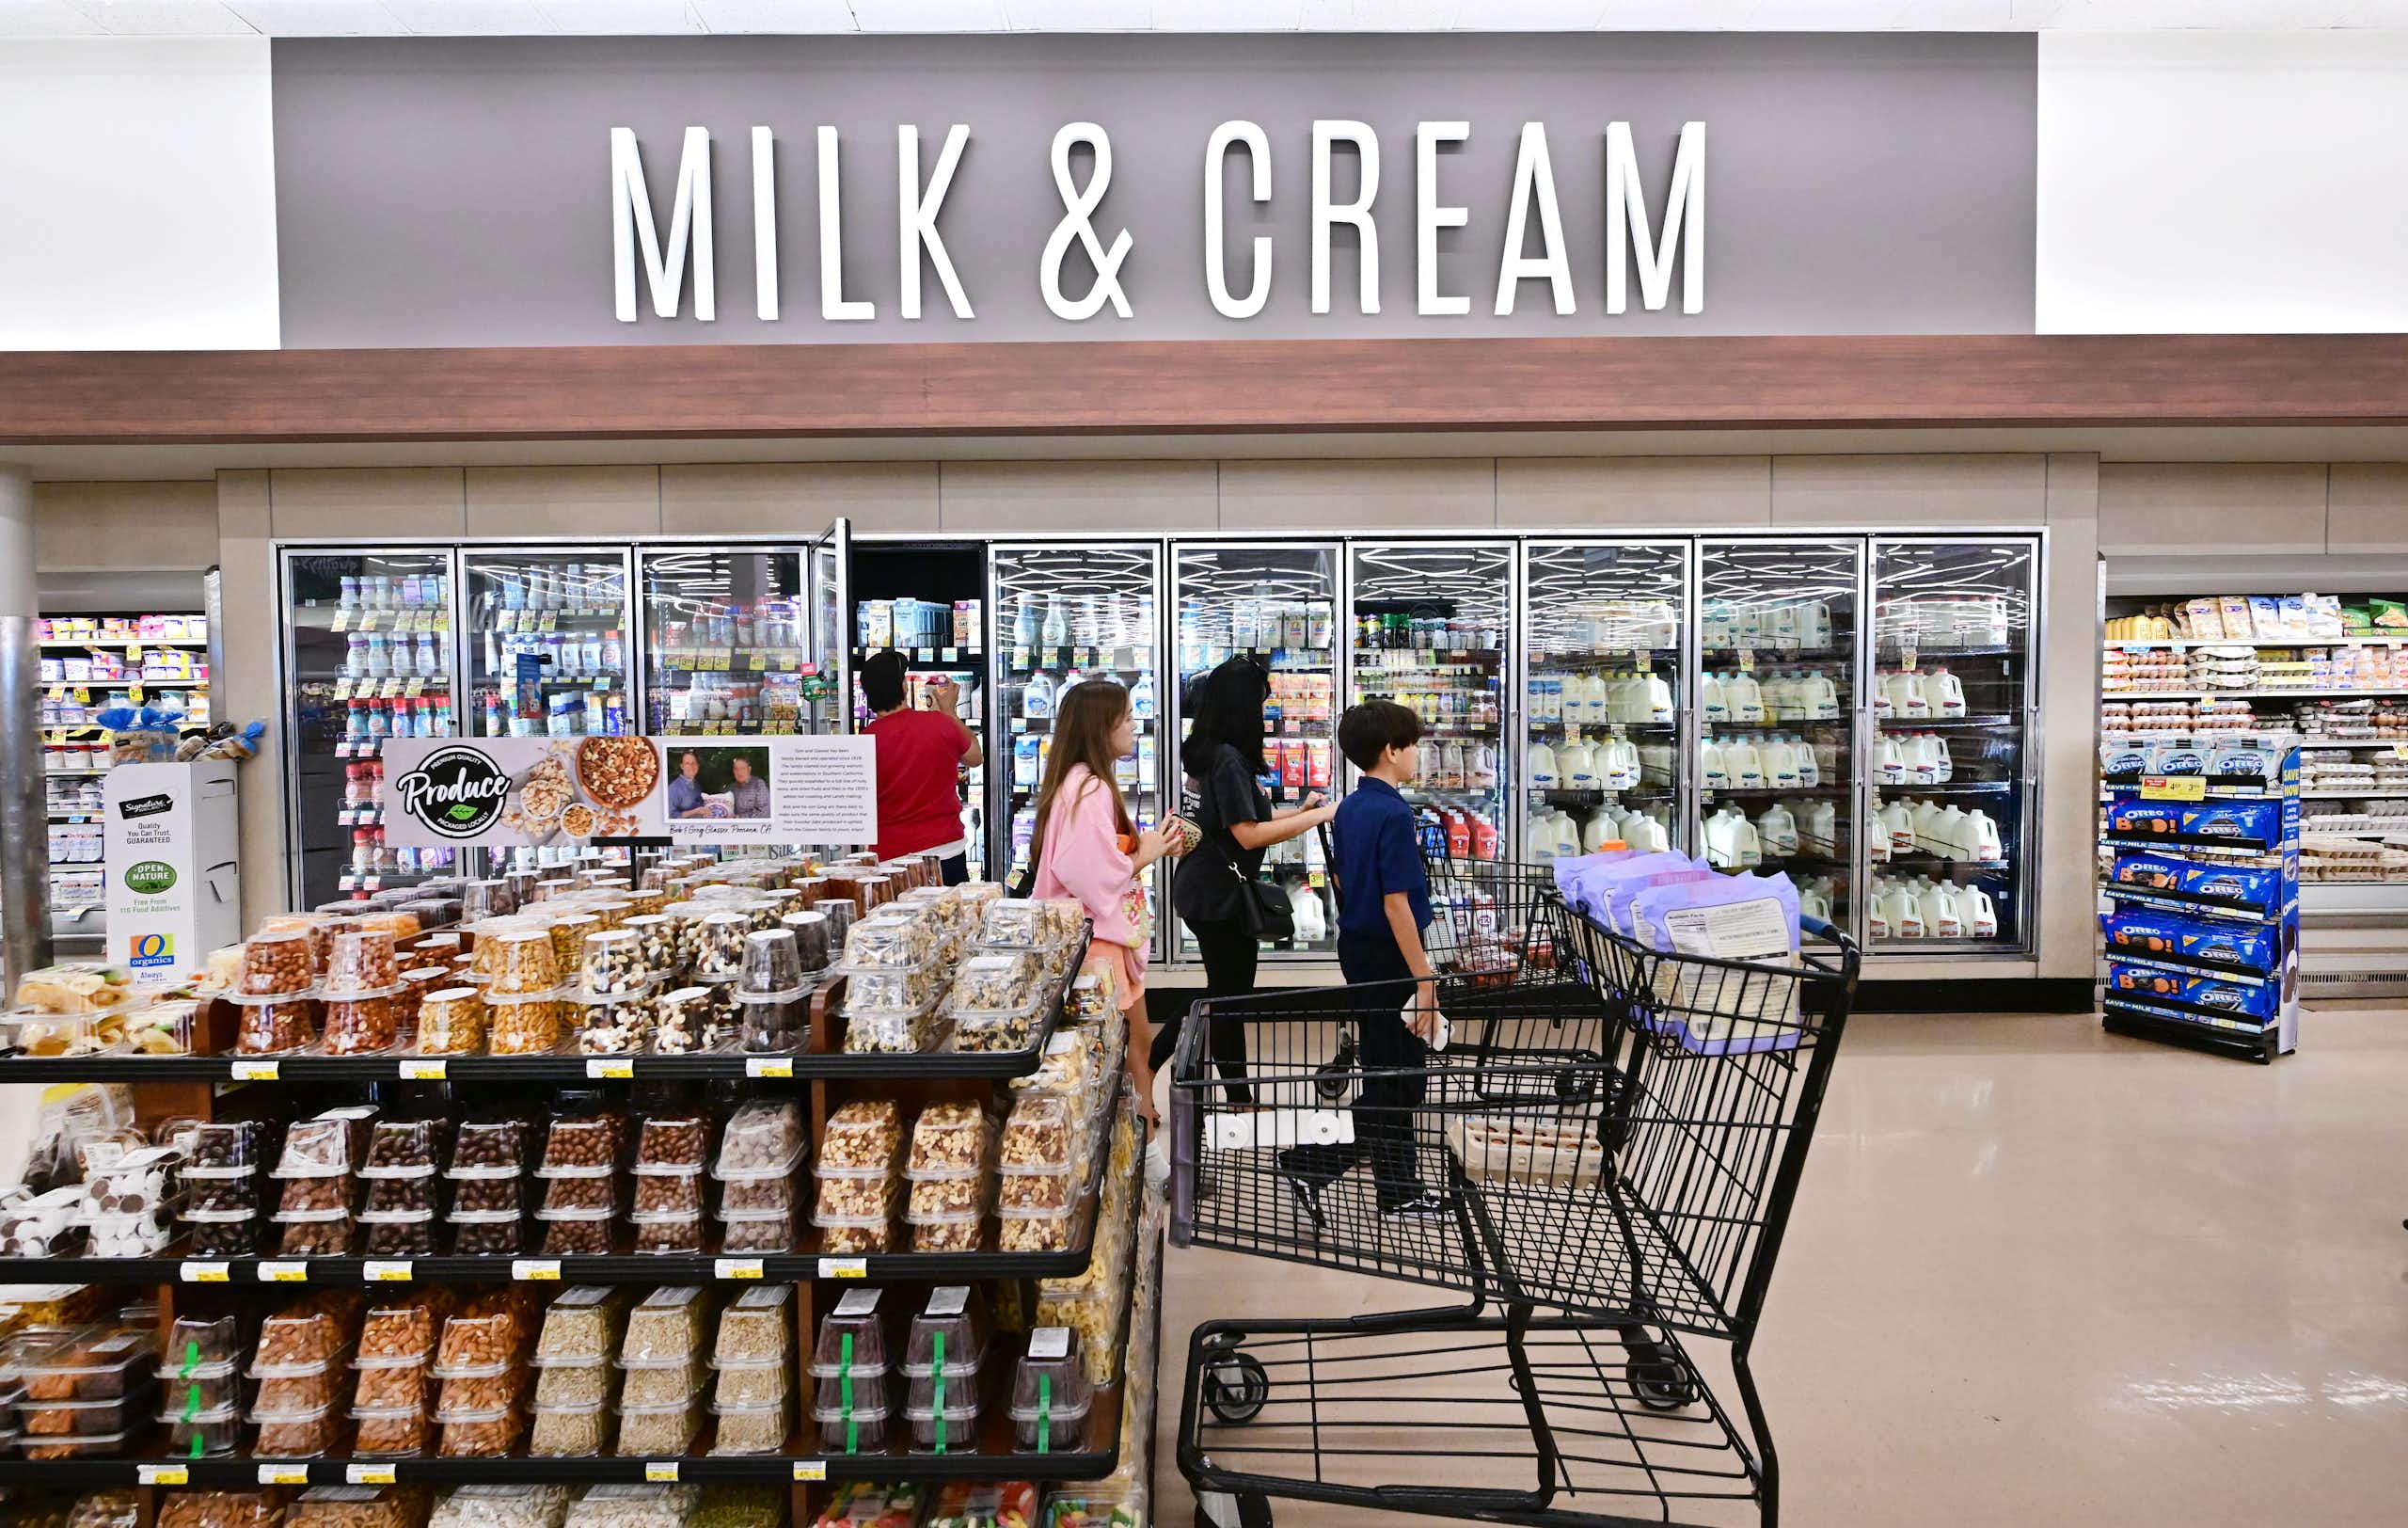 People walk past refrigerated cases under a large sign reading 'Milk & Cream'